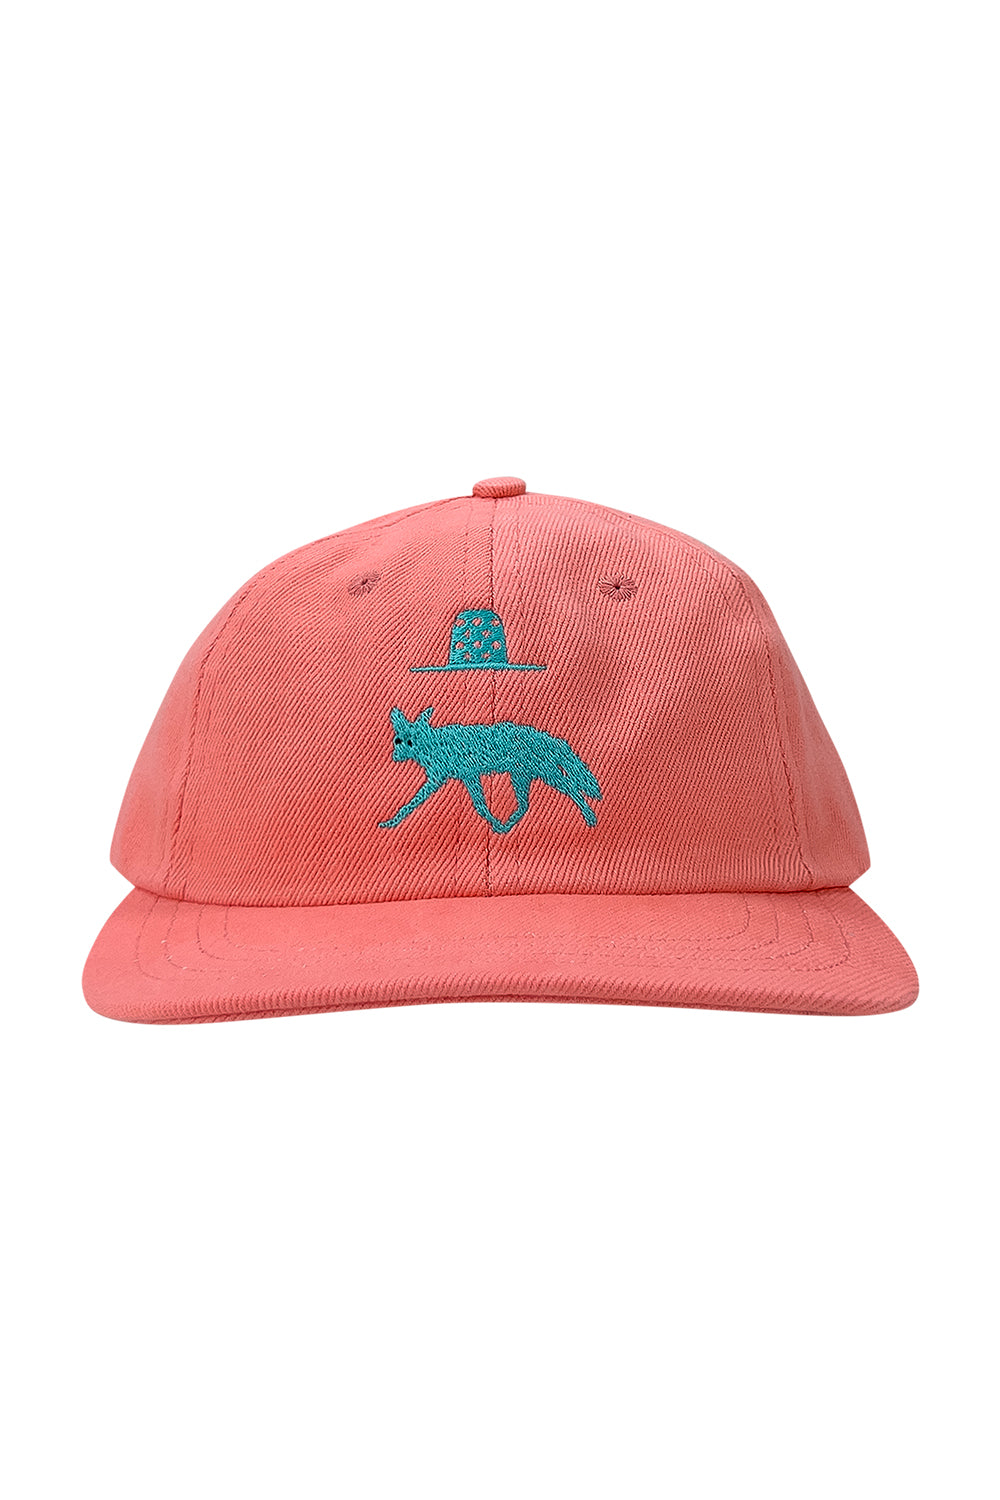 Coyote Twill Cap | Jungmaven Hemp Clothing & Accessories / Color: Pink Salmon